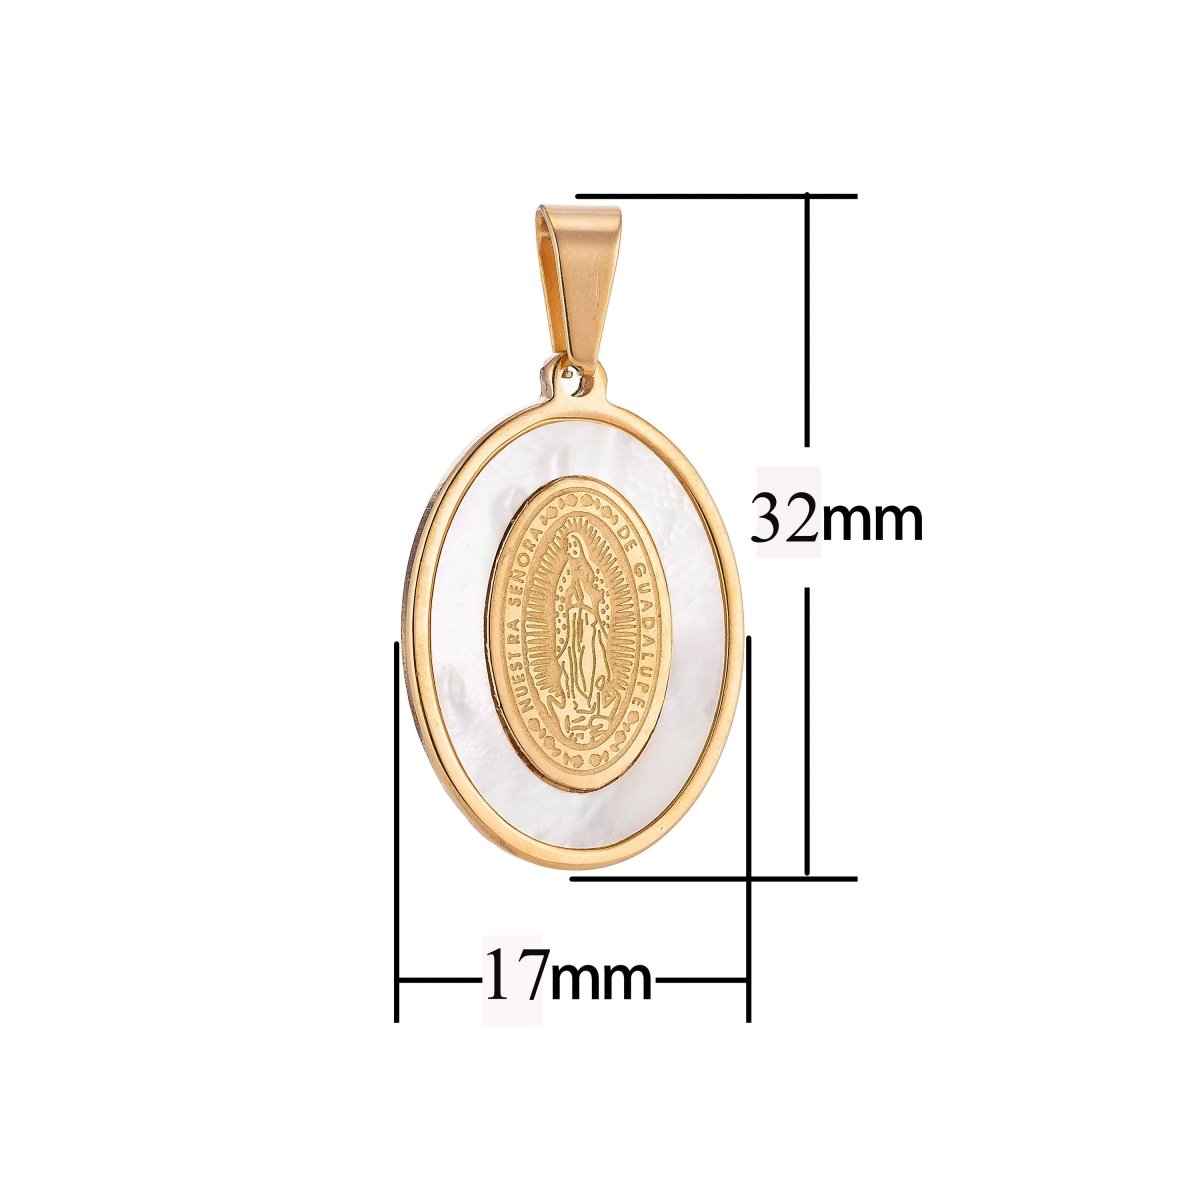 Gold Filled Stainless Steel White Sea Shell Virgin Mary "Nuest Ra Senora De Guadalupe" Religious Gold / Silver Pendant J-418 J-653 - DLUXCA